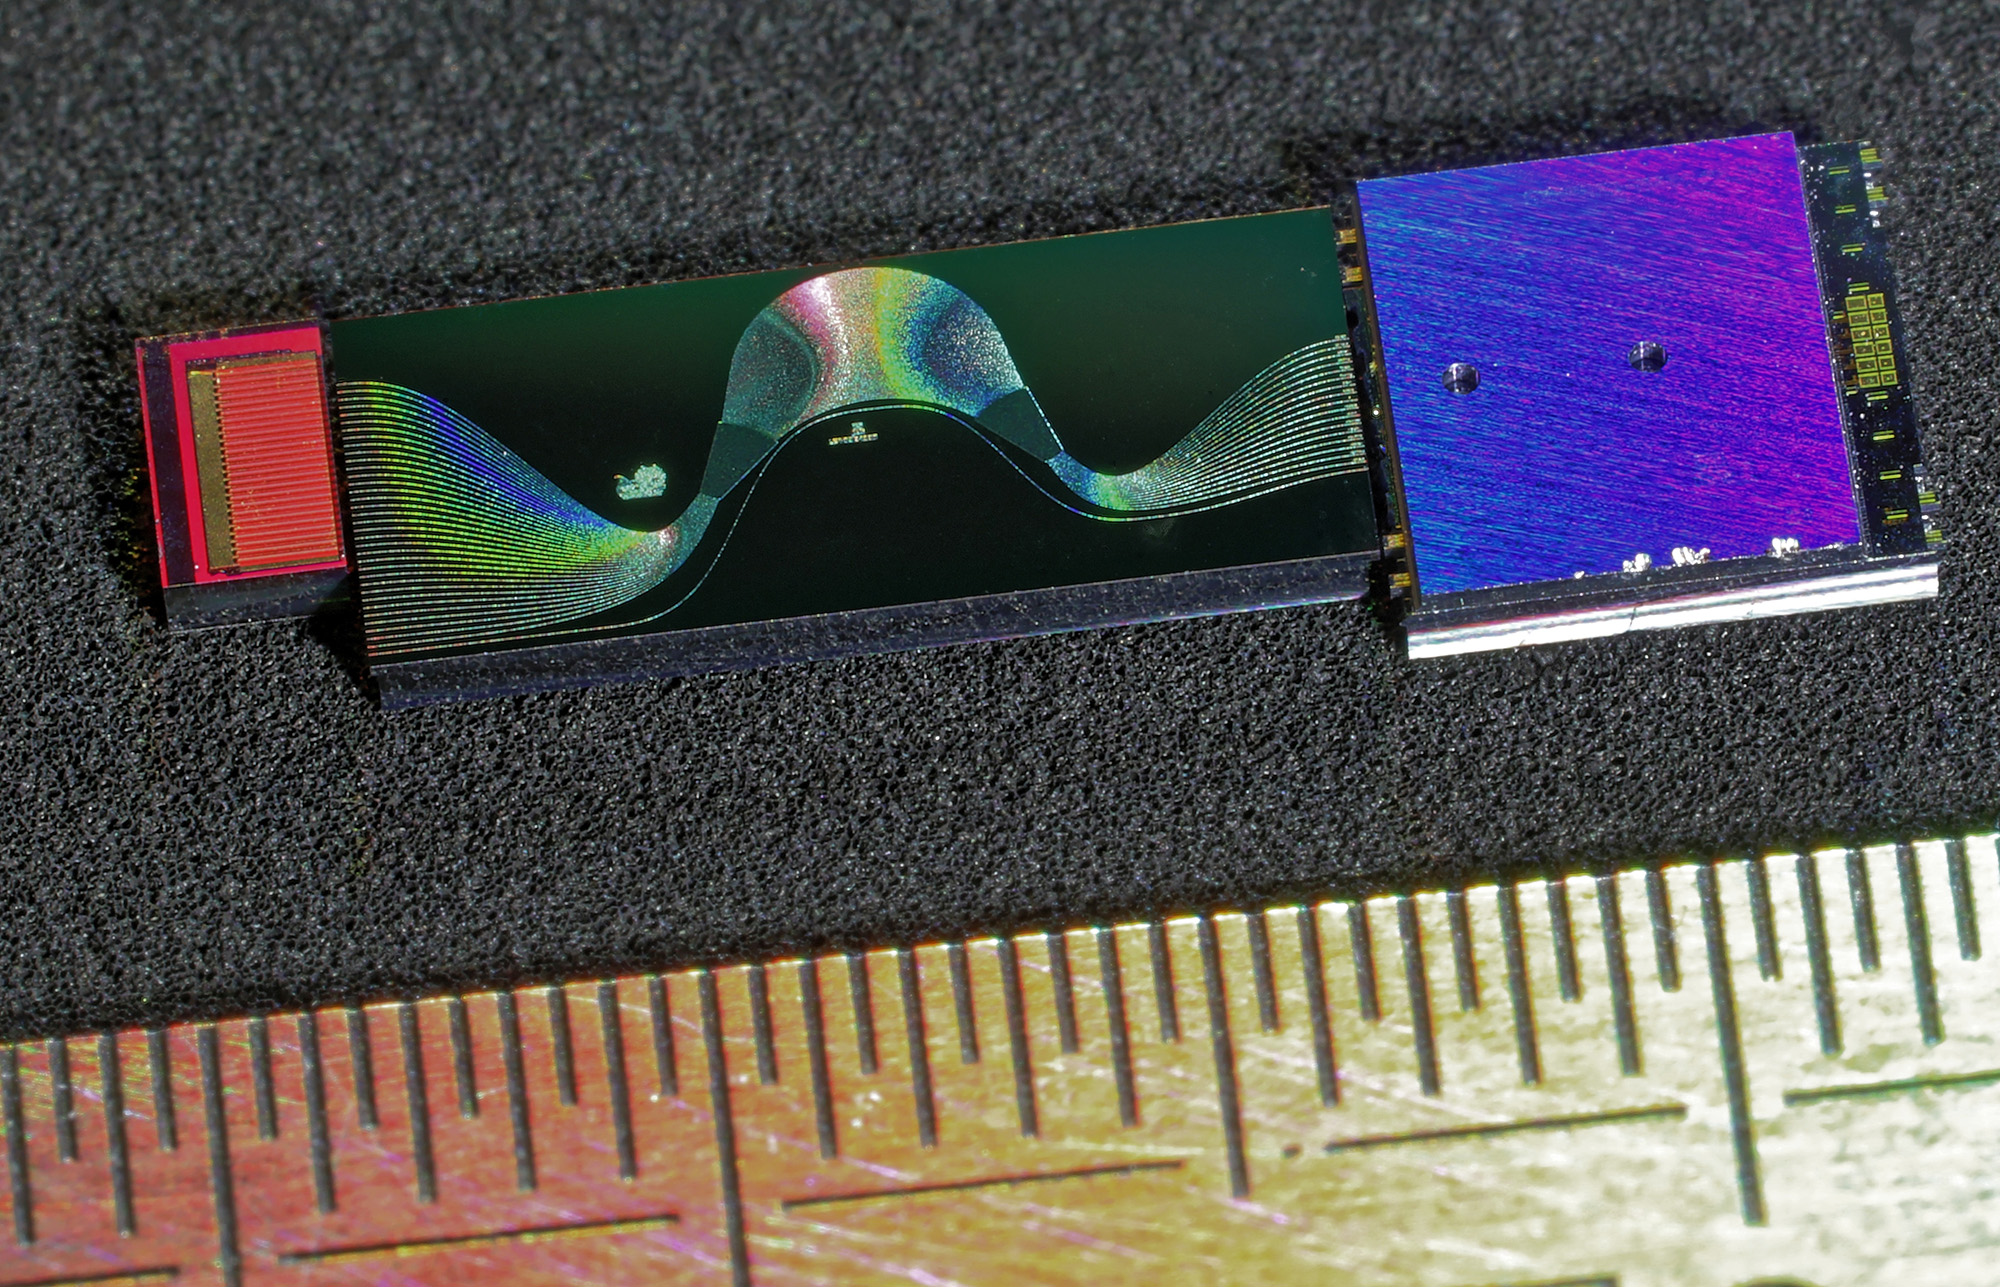 CEA-Leti Develops Tiny Photoacoustic-Spectroscopy System For Detecting Chemicals & Gases